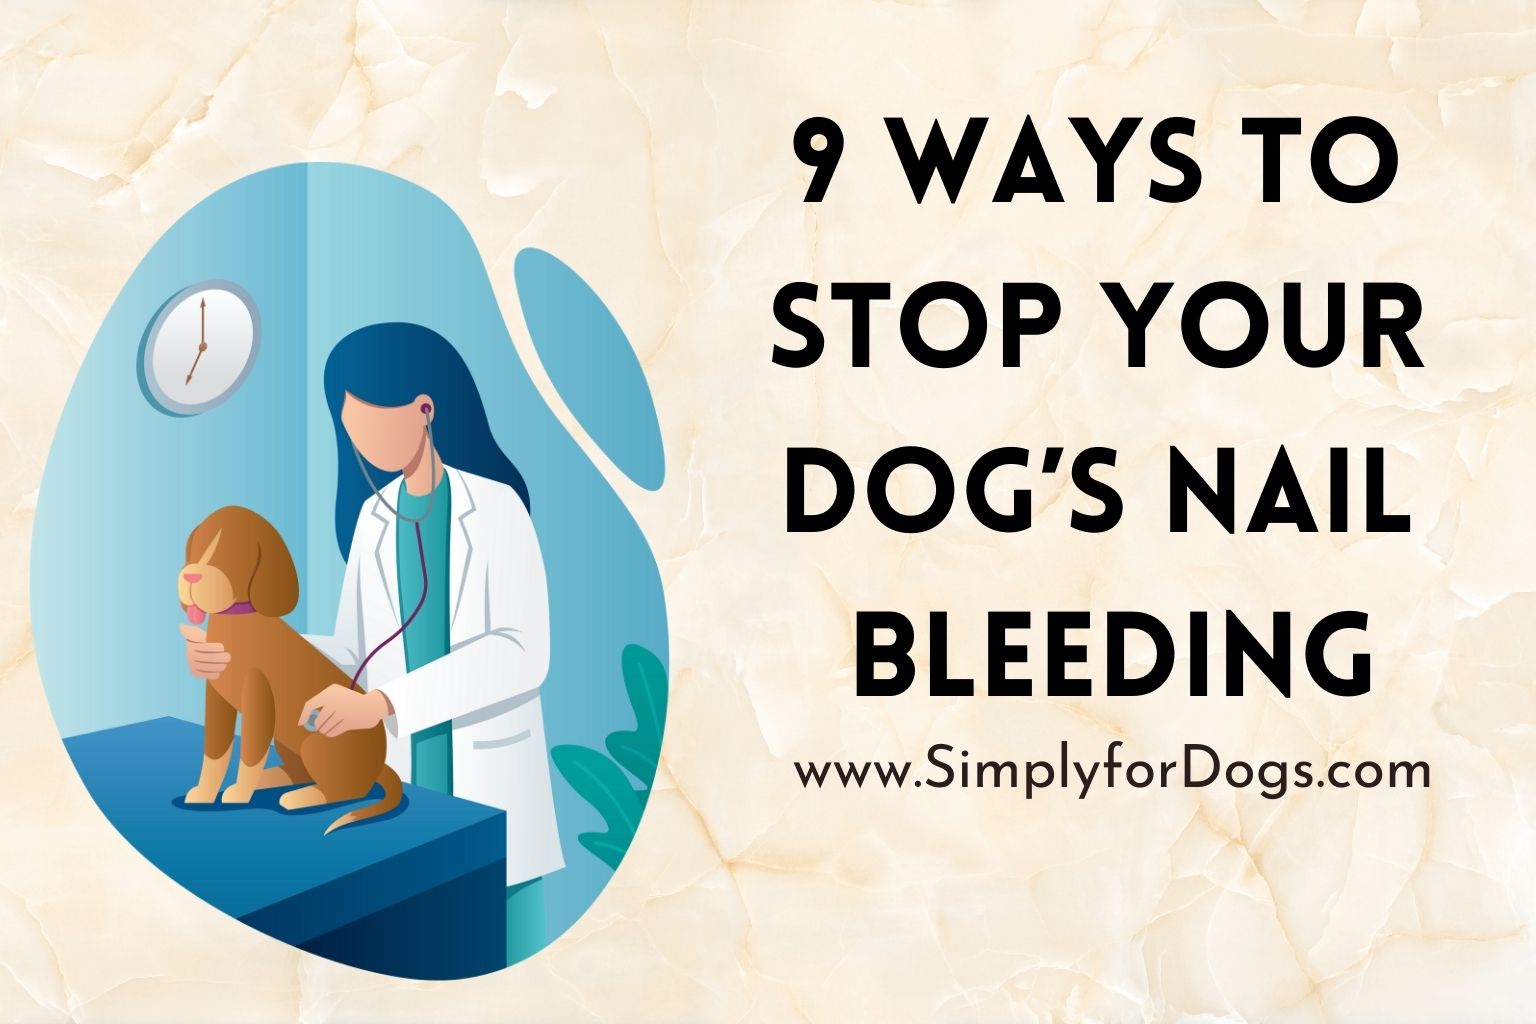 9 Ways to Stop Your Dog’s Nail Bleeding